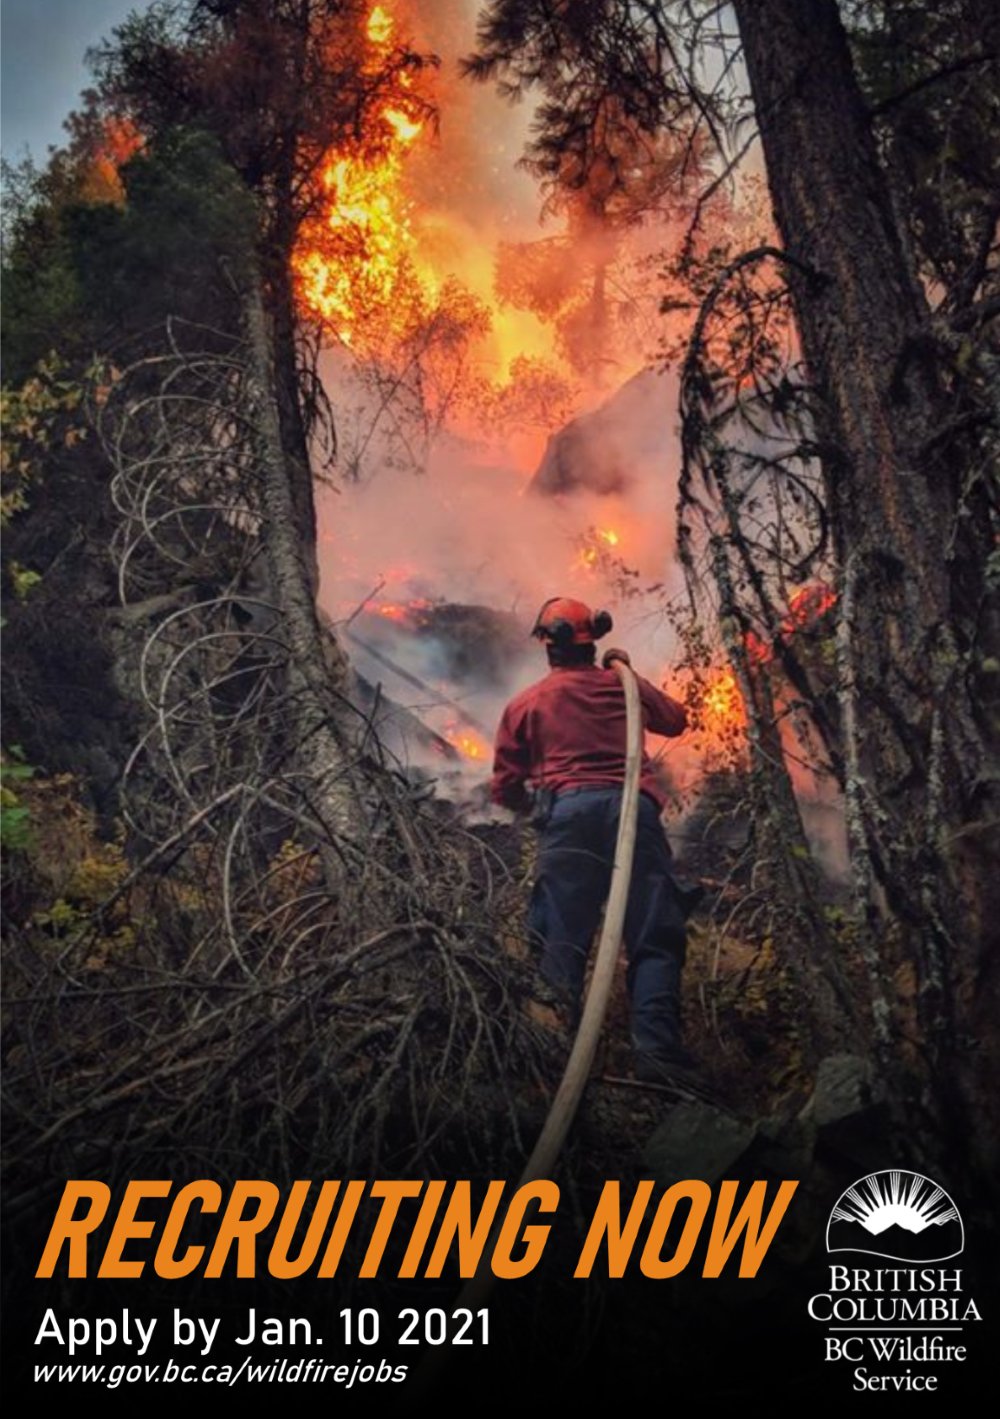 Bc Wildfire Service On Twitter There S Still Time Applications To Become A Firefighter With The Bcwildfire Service For The 2021 Wildfire Season Are Still Being Accepted Apply By January 10 2021 Learn